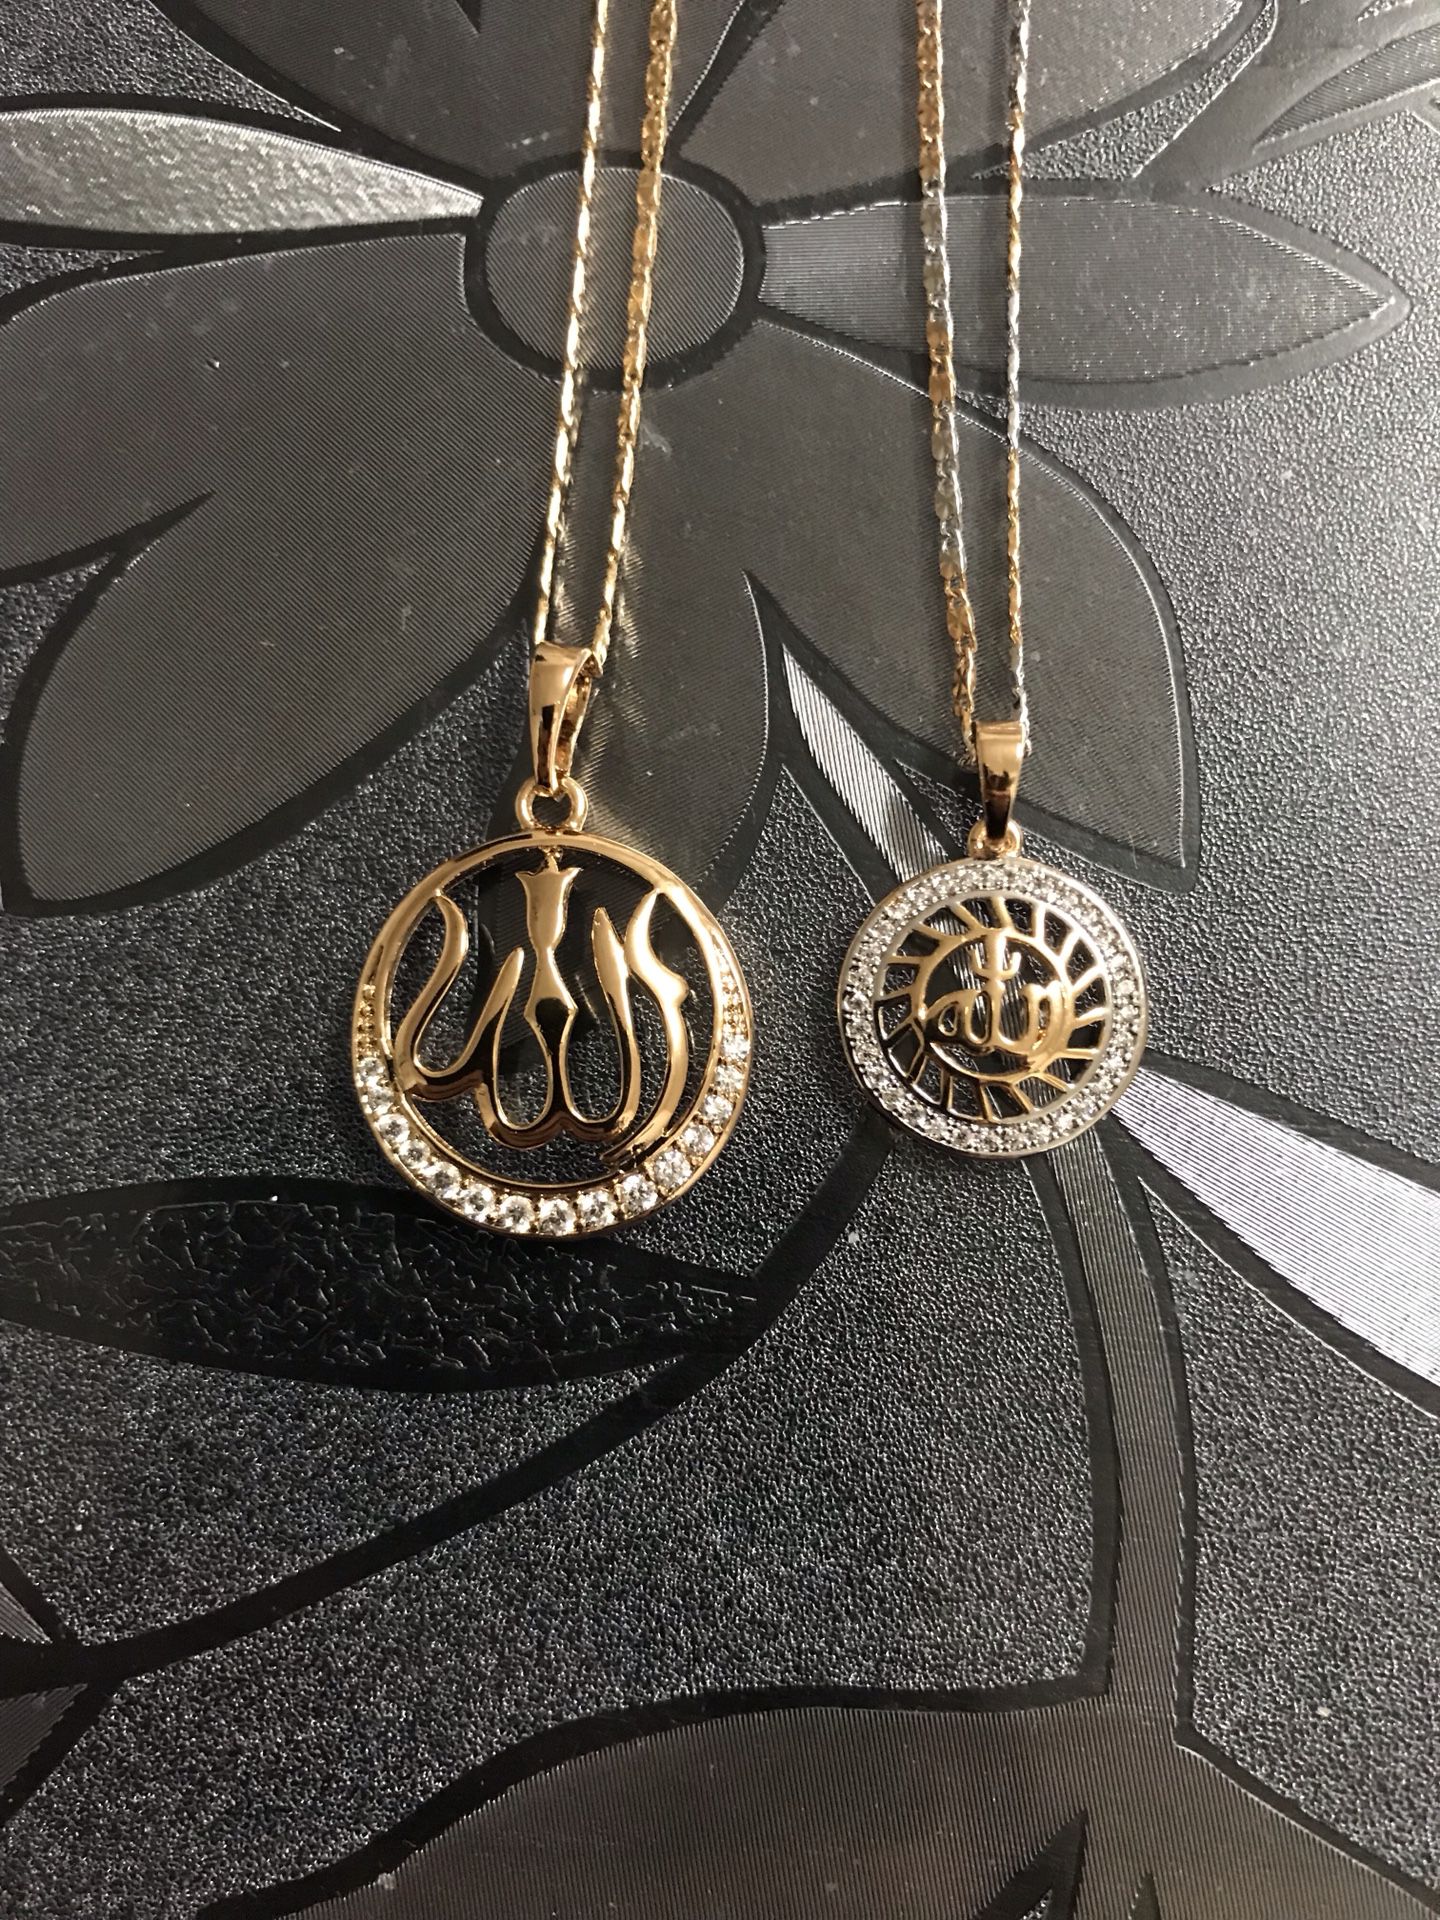 Gold plated pendant with chain ($10 each)